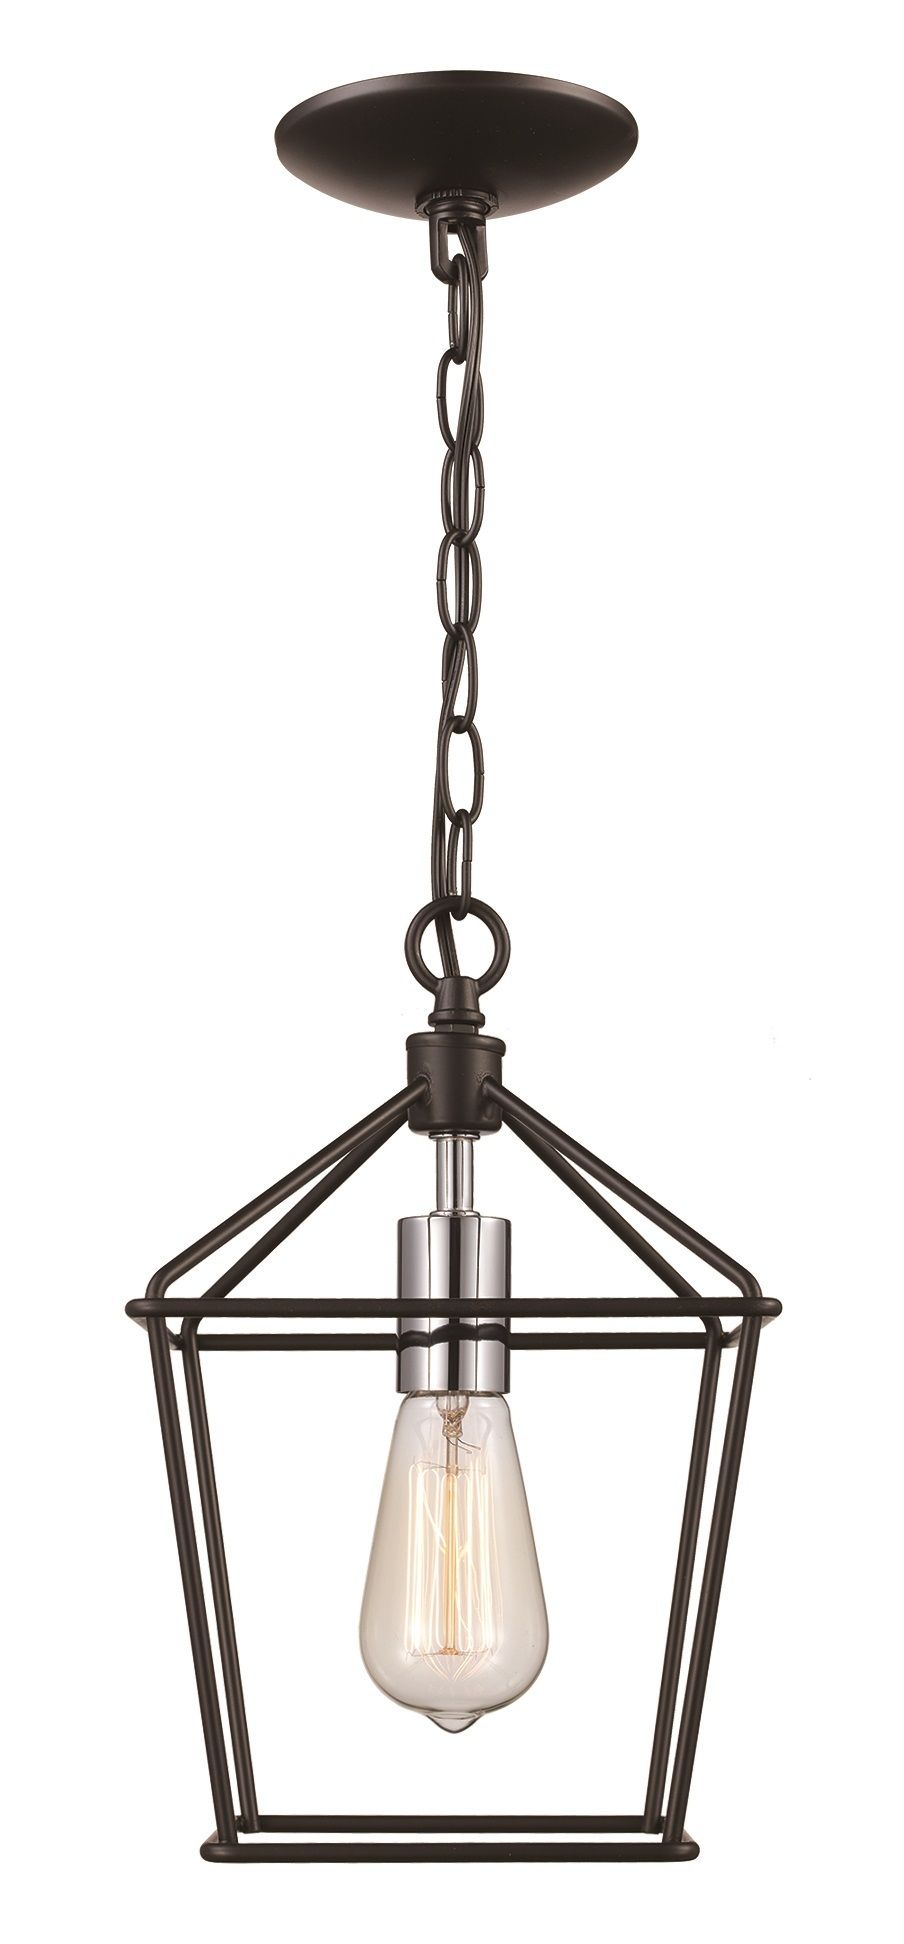 Lacey Too 1 Light Lantern Pendant : 30261 Bk Pc | Lighting Depot Intended For One Light Lantern Chandeliers (View 14 of 15)